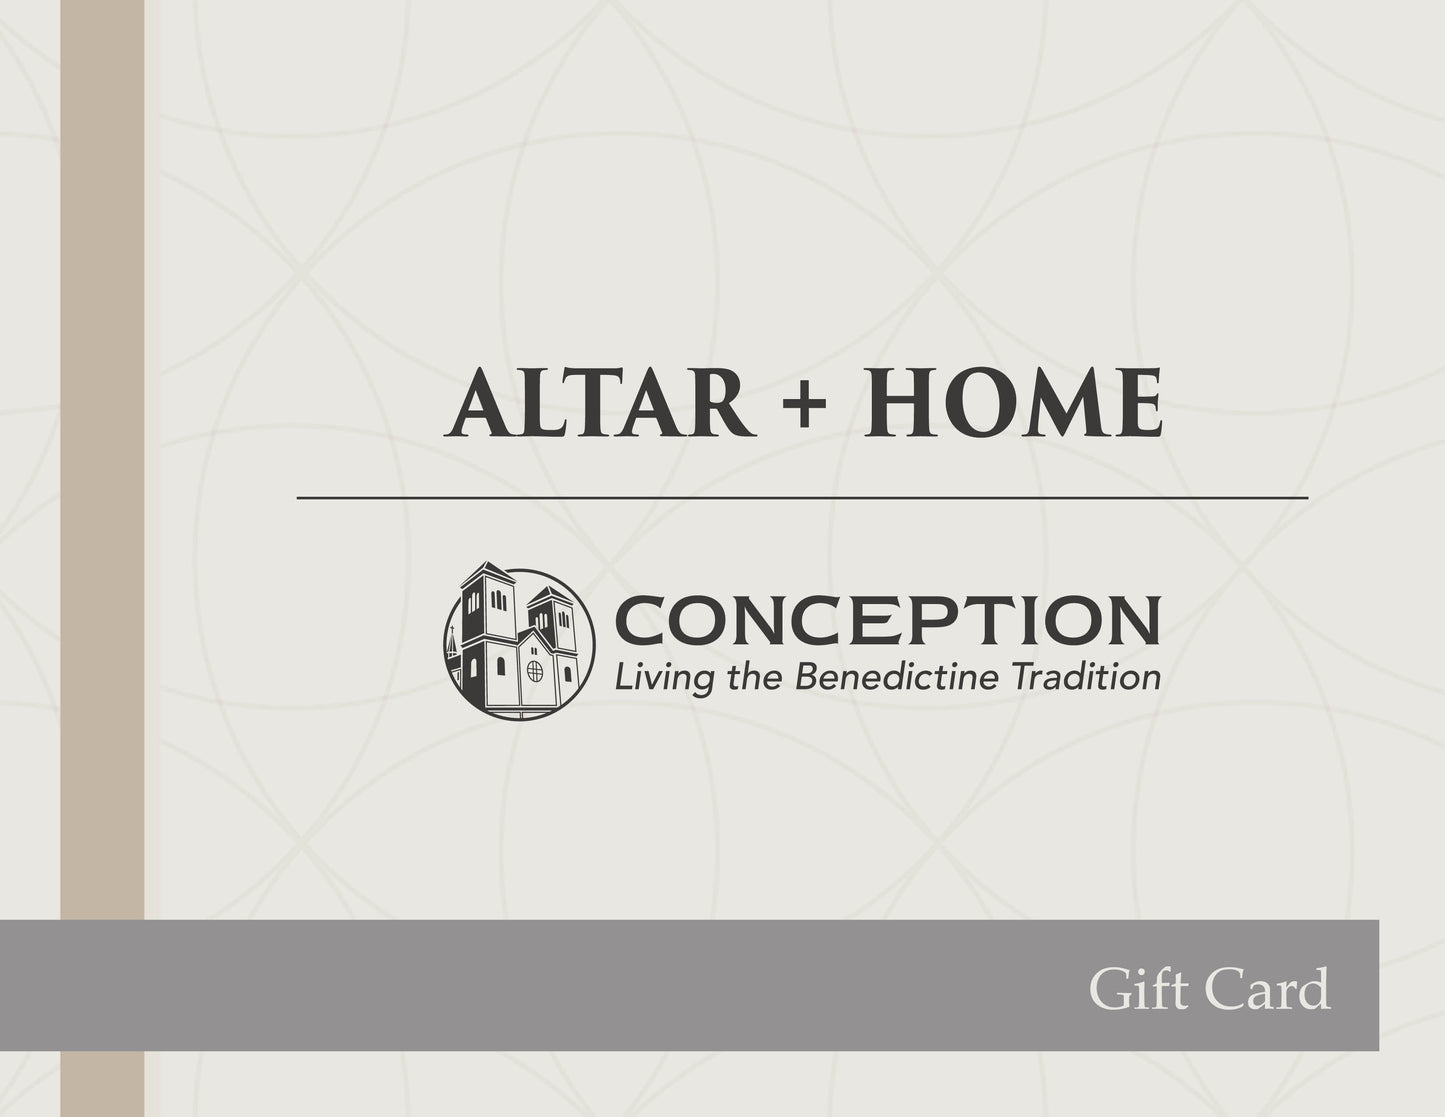 Altar + Home gift card